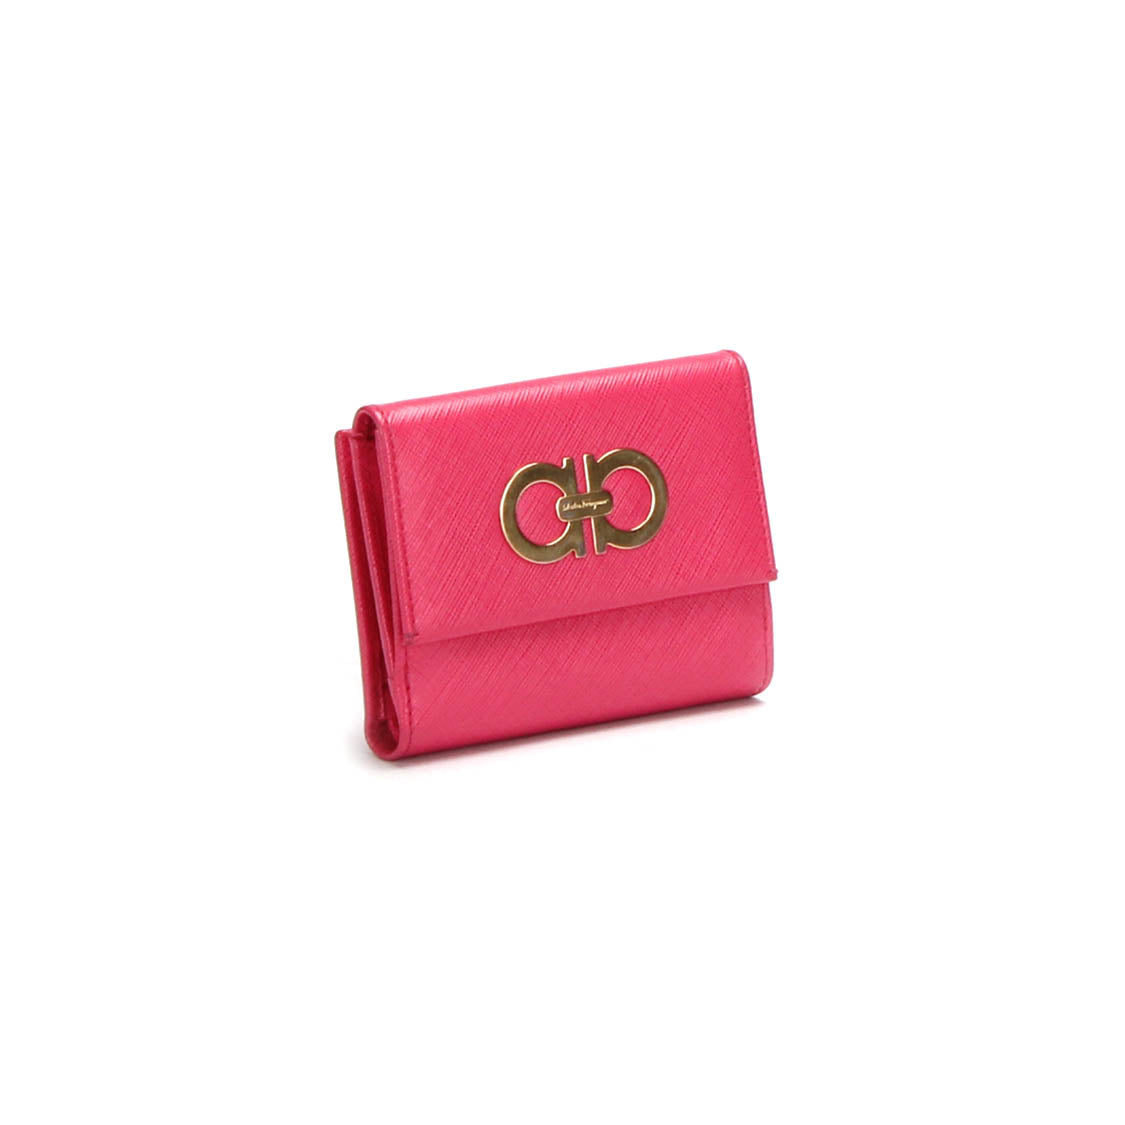 Leather Gancini Compact Wallet IR227122